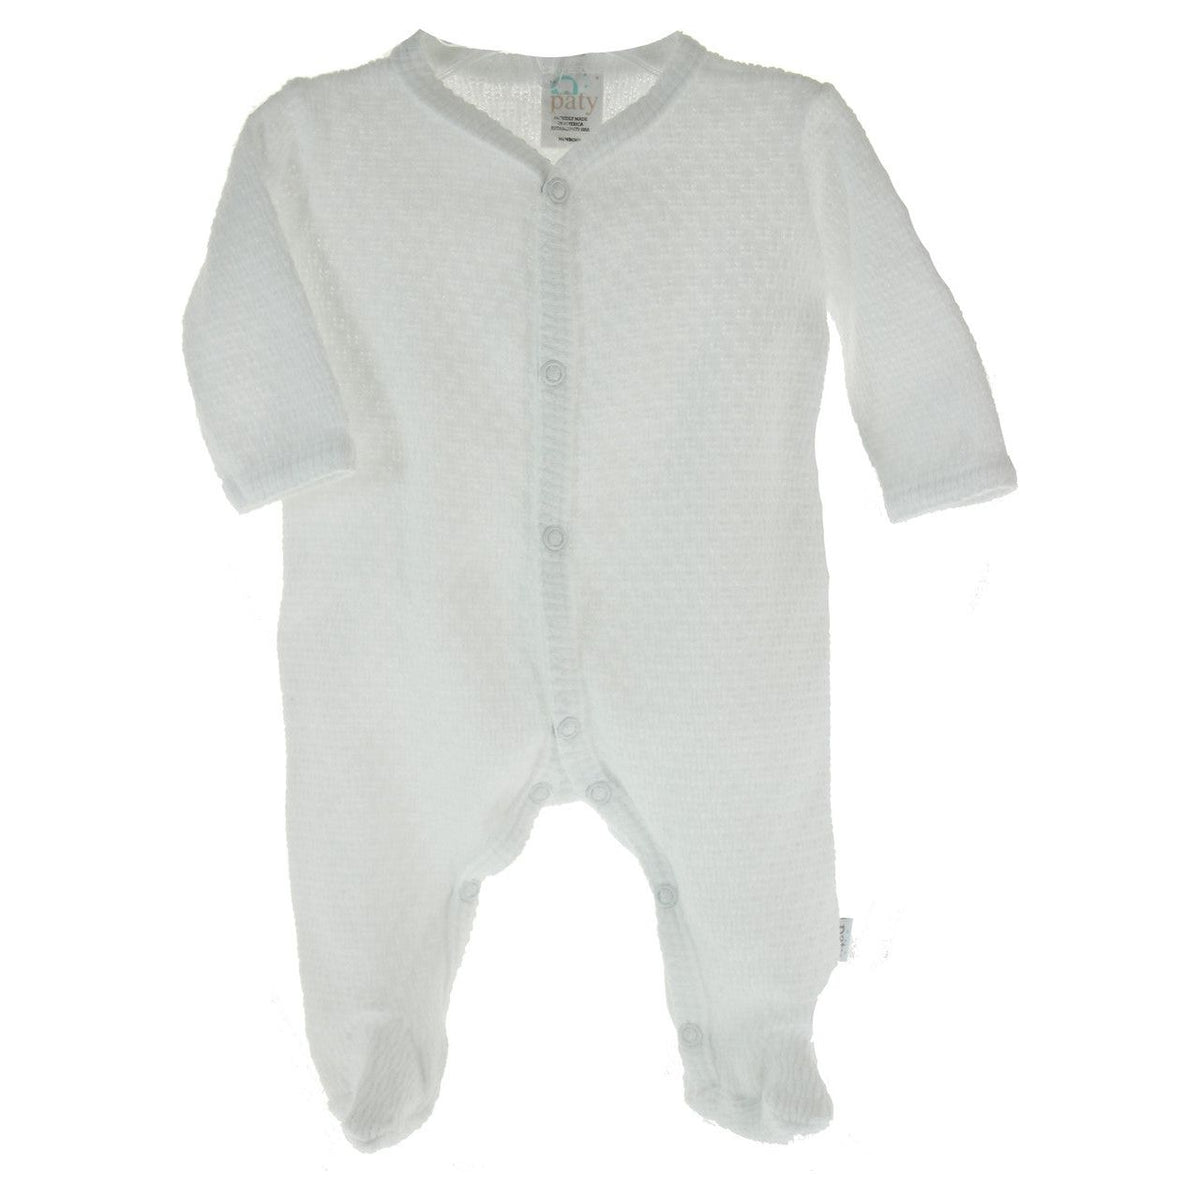 Unisex Coming Home Outfit White Sleeper Footed Onesie